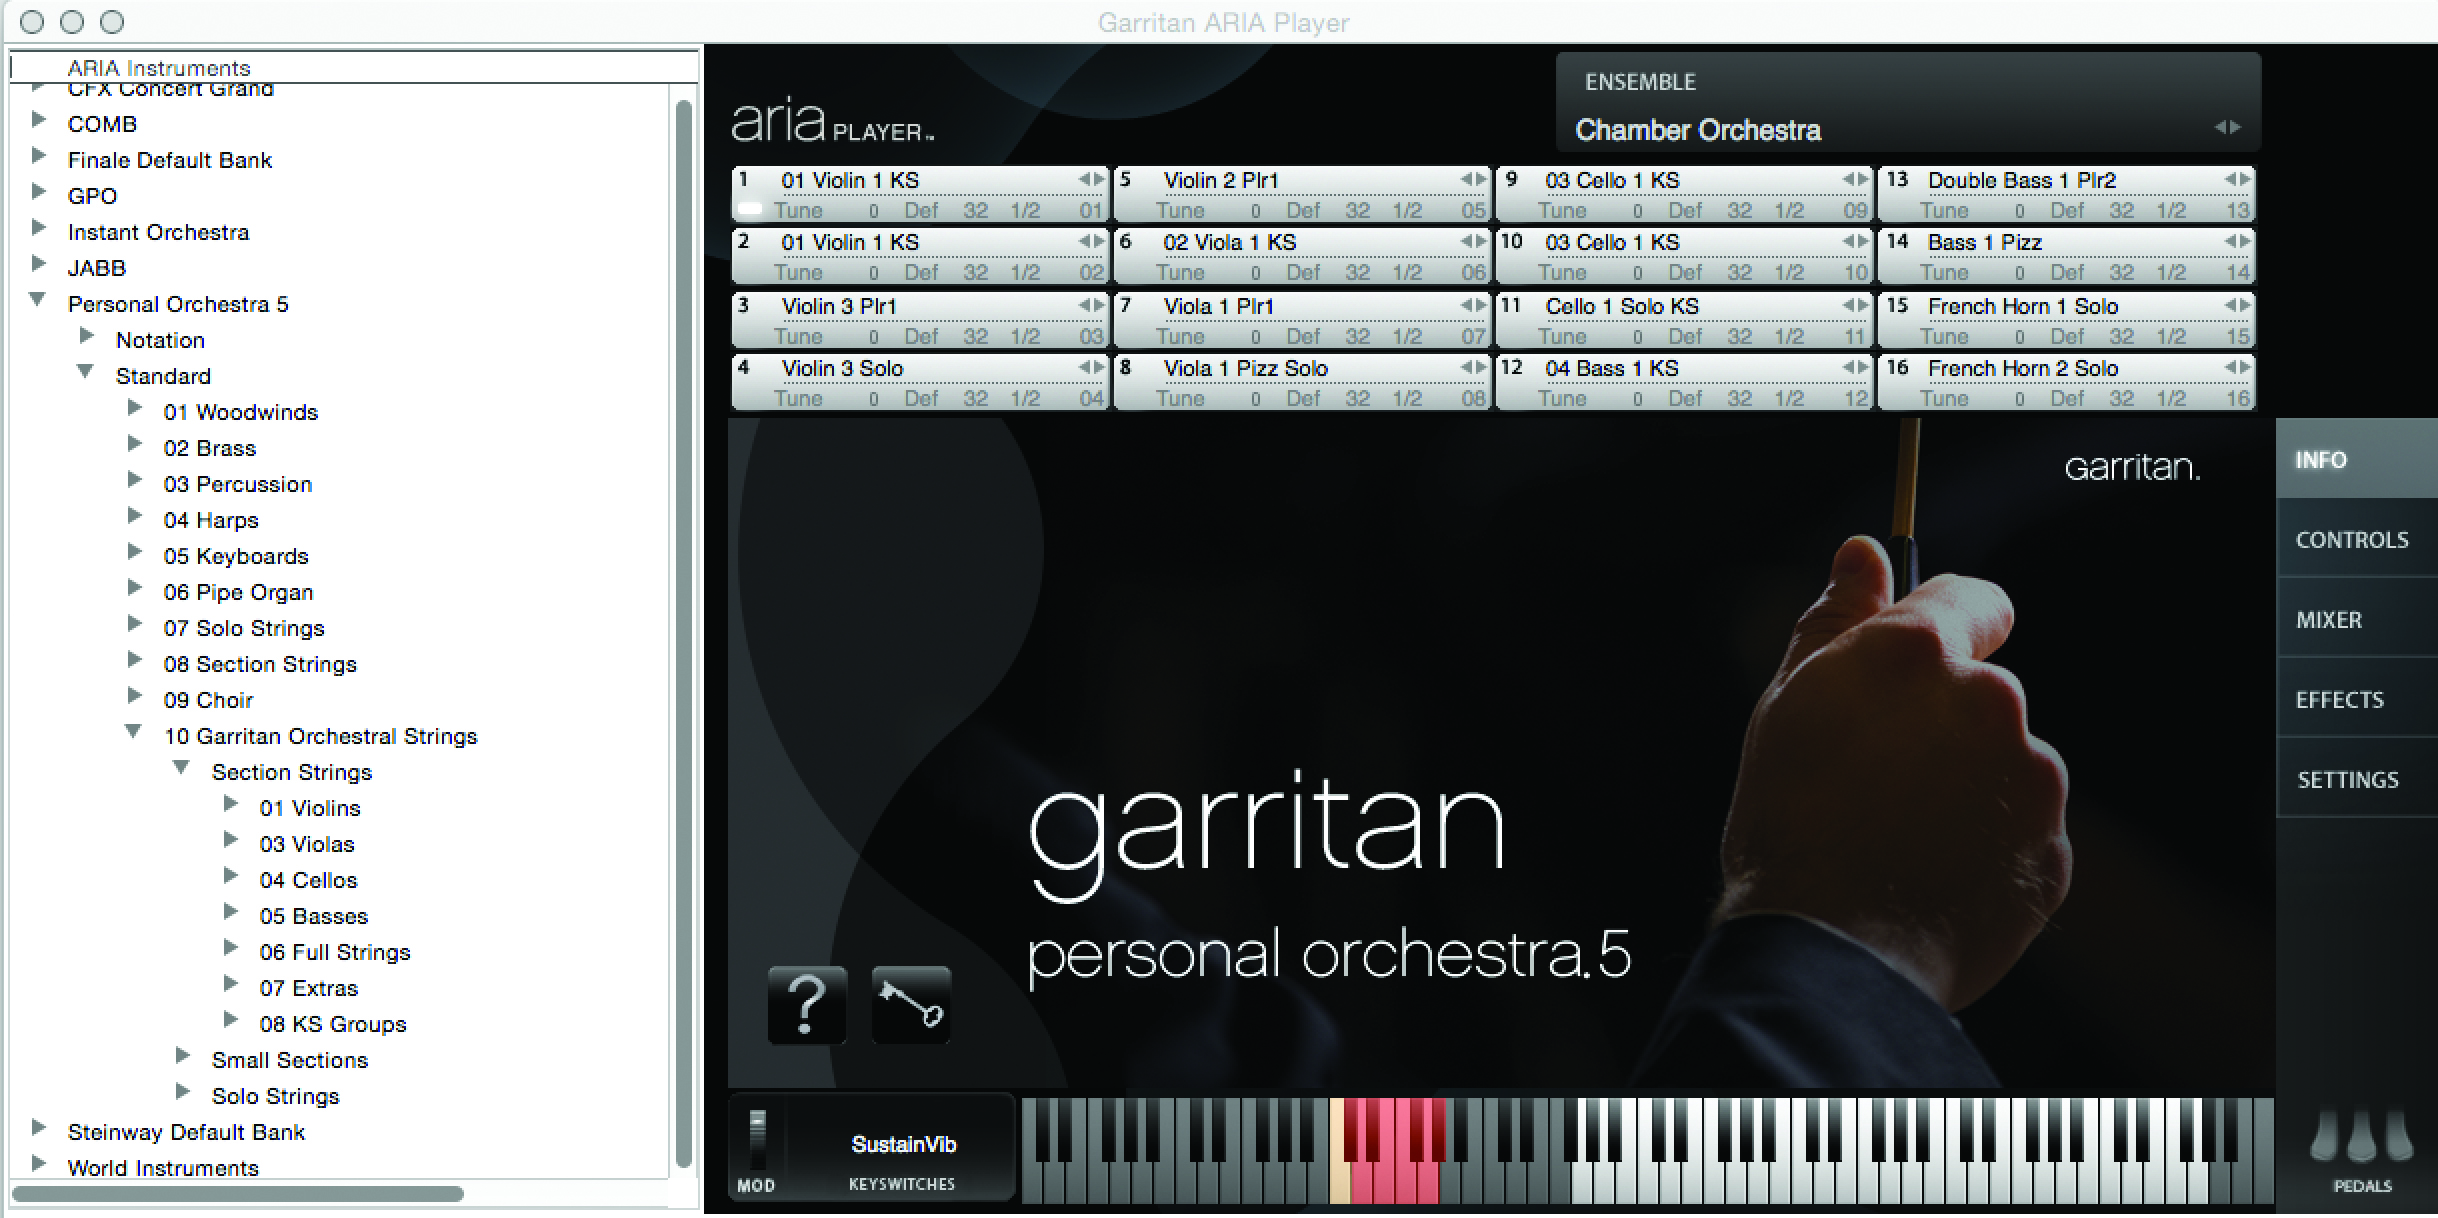 garritan personal orchestra 5 out of tune performance issue